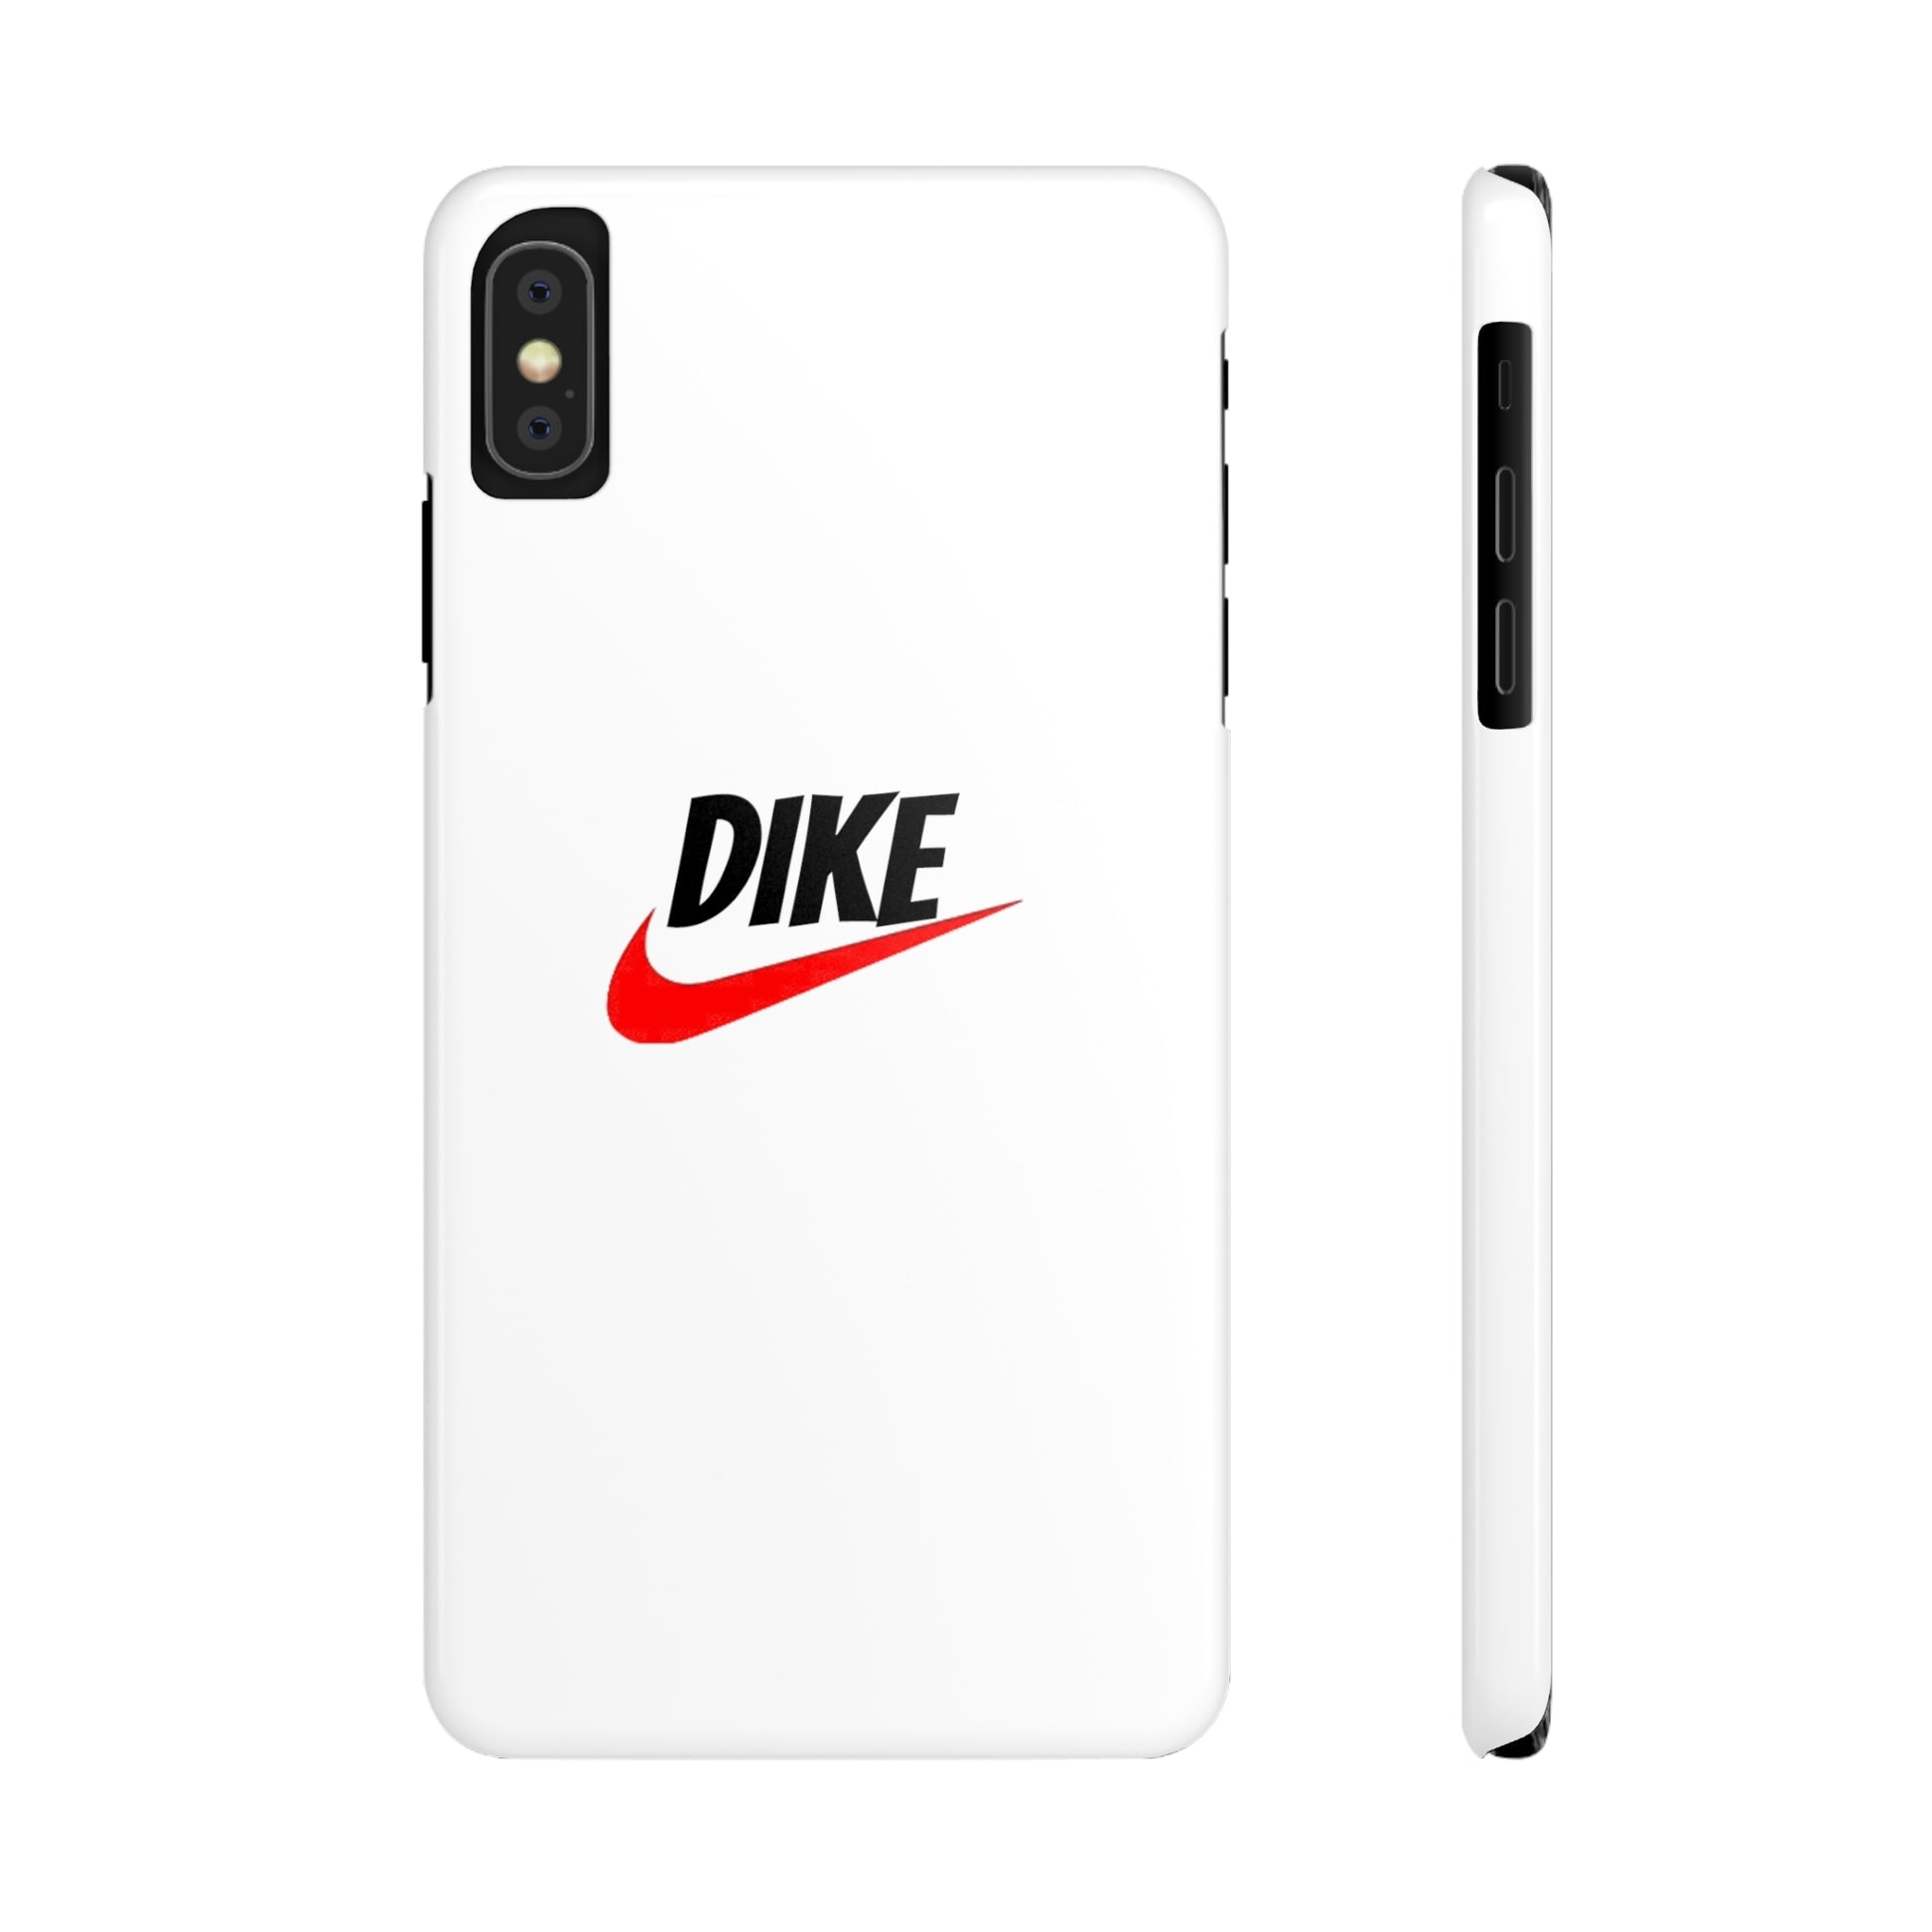 "Dike" MagStrong Phone Cases iPhone XS MAX